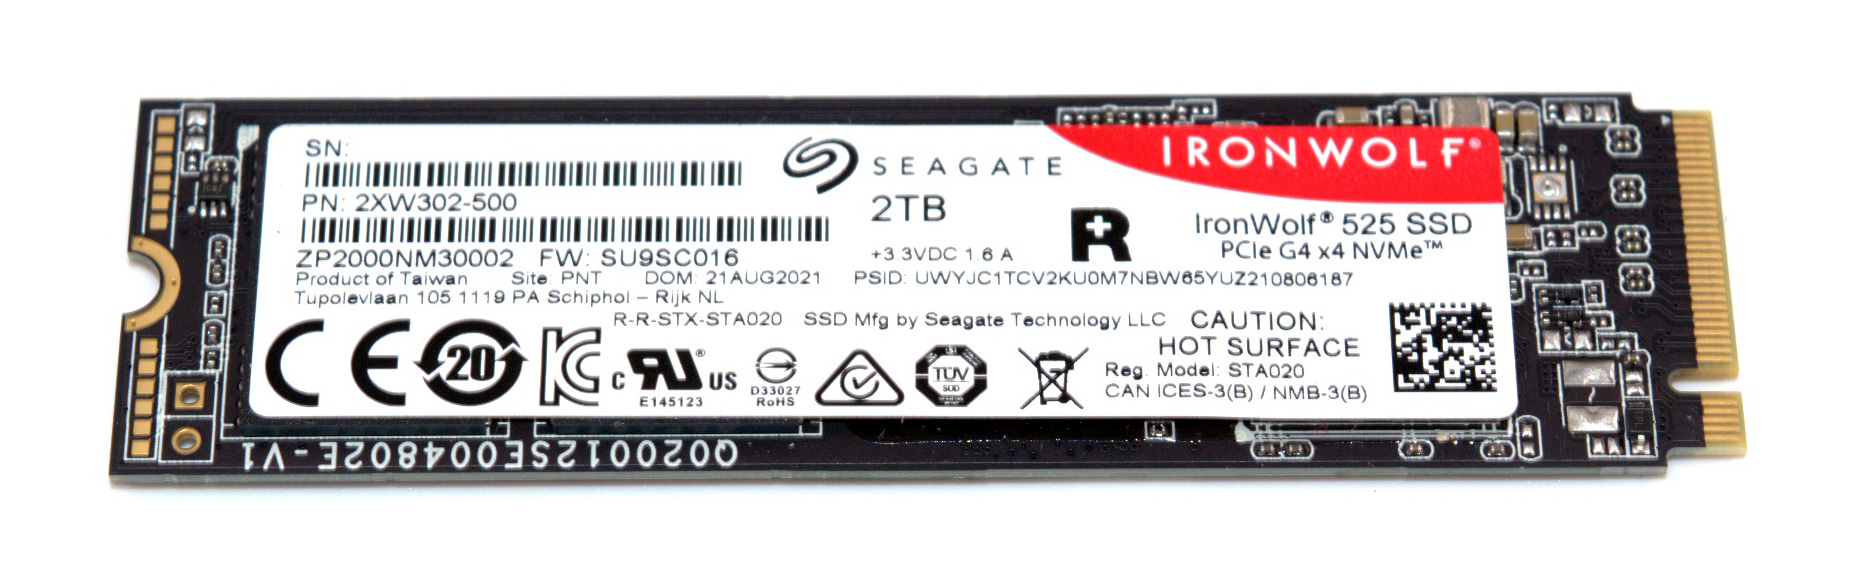 Seagate Introduces Ironwolf 525 Pcie 4 0 M 2 Nvme Ssds For Nas Systems